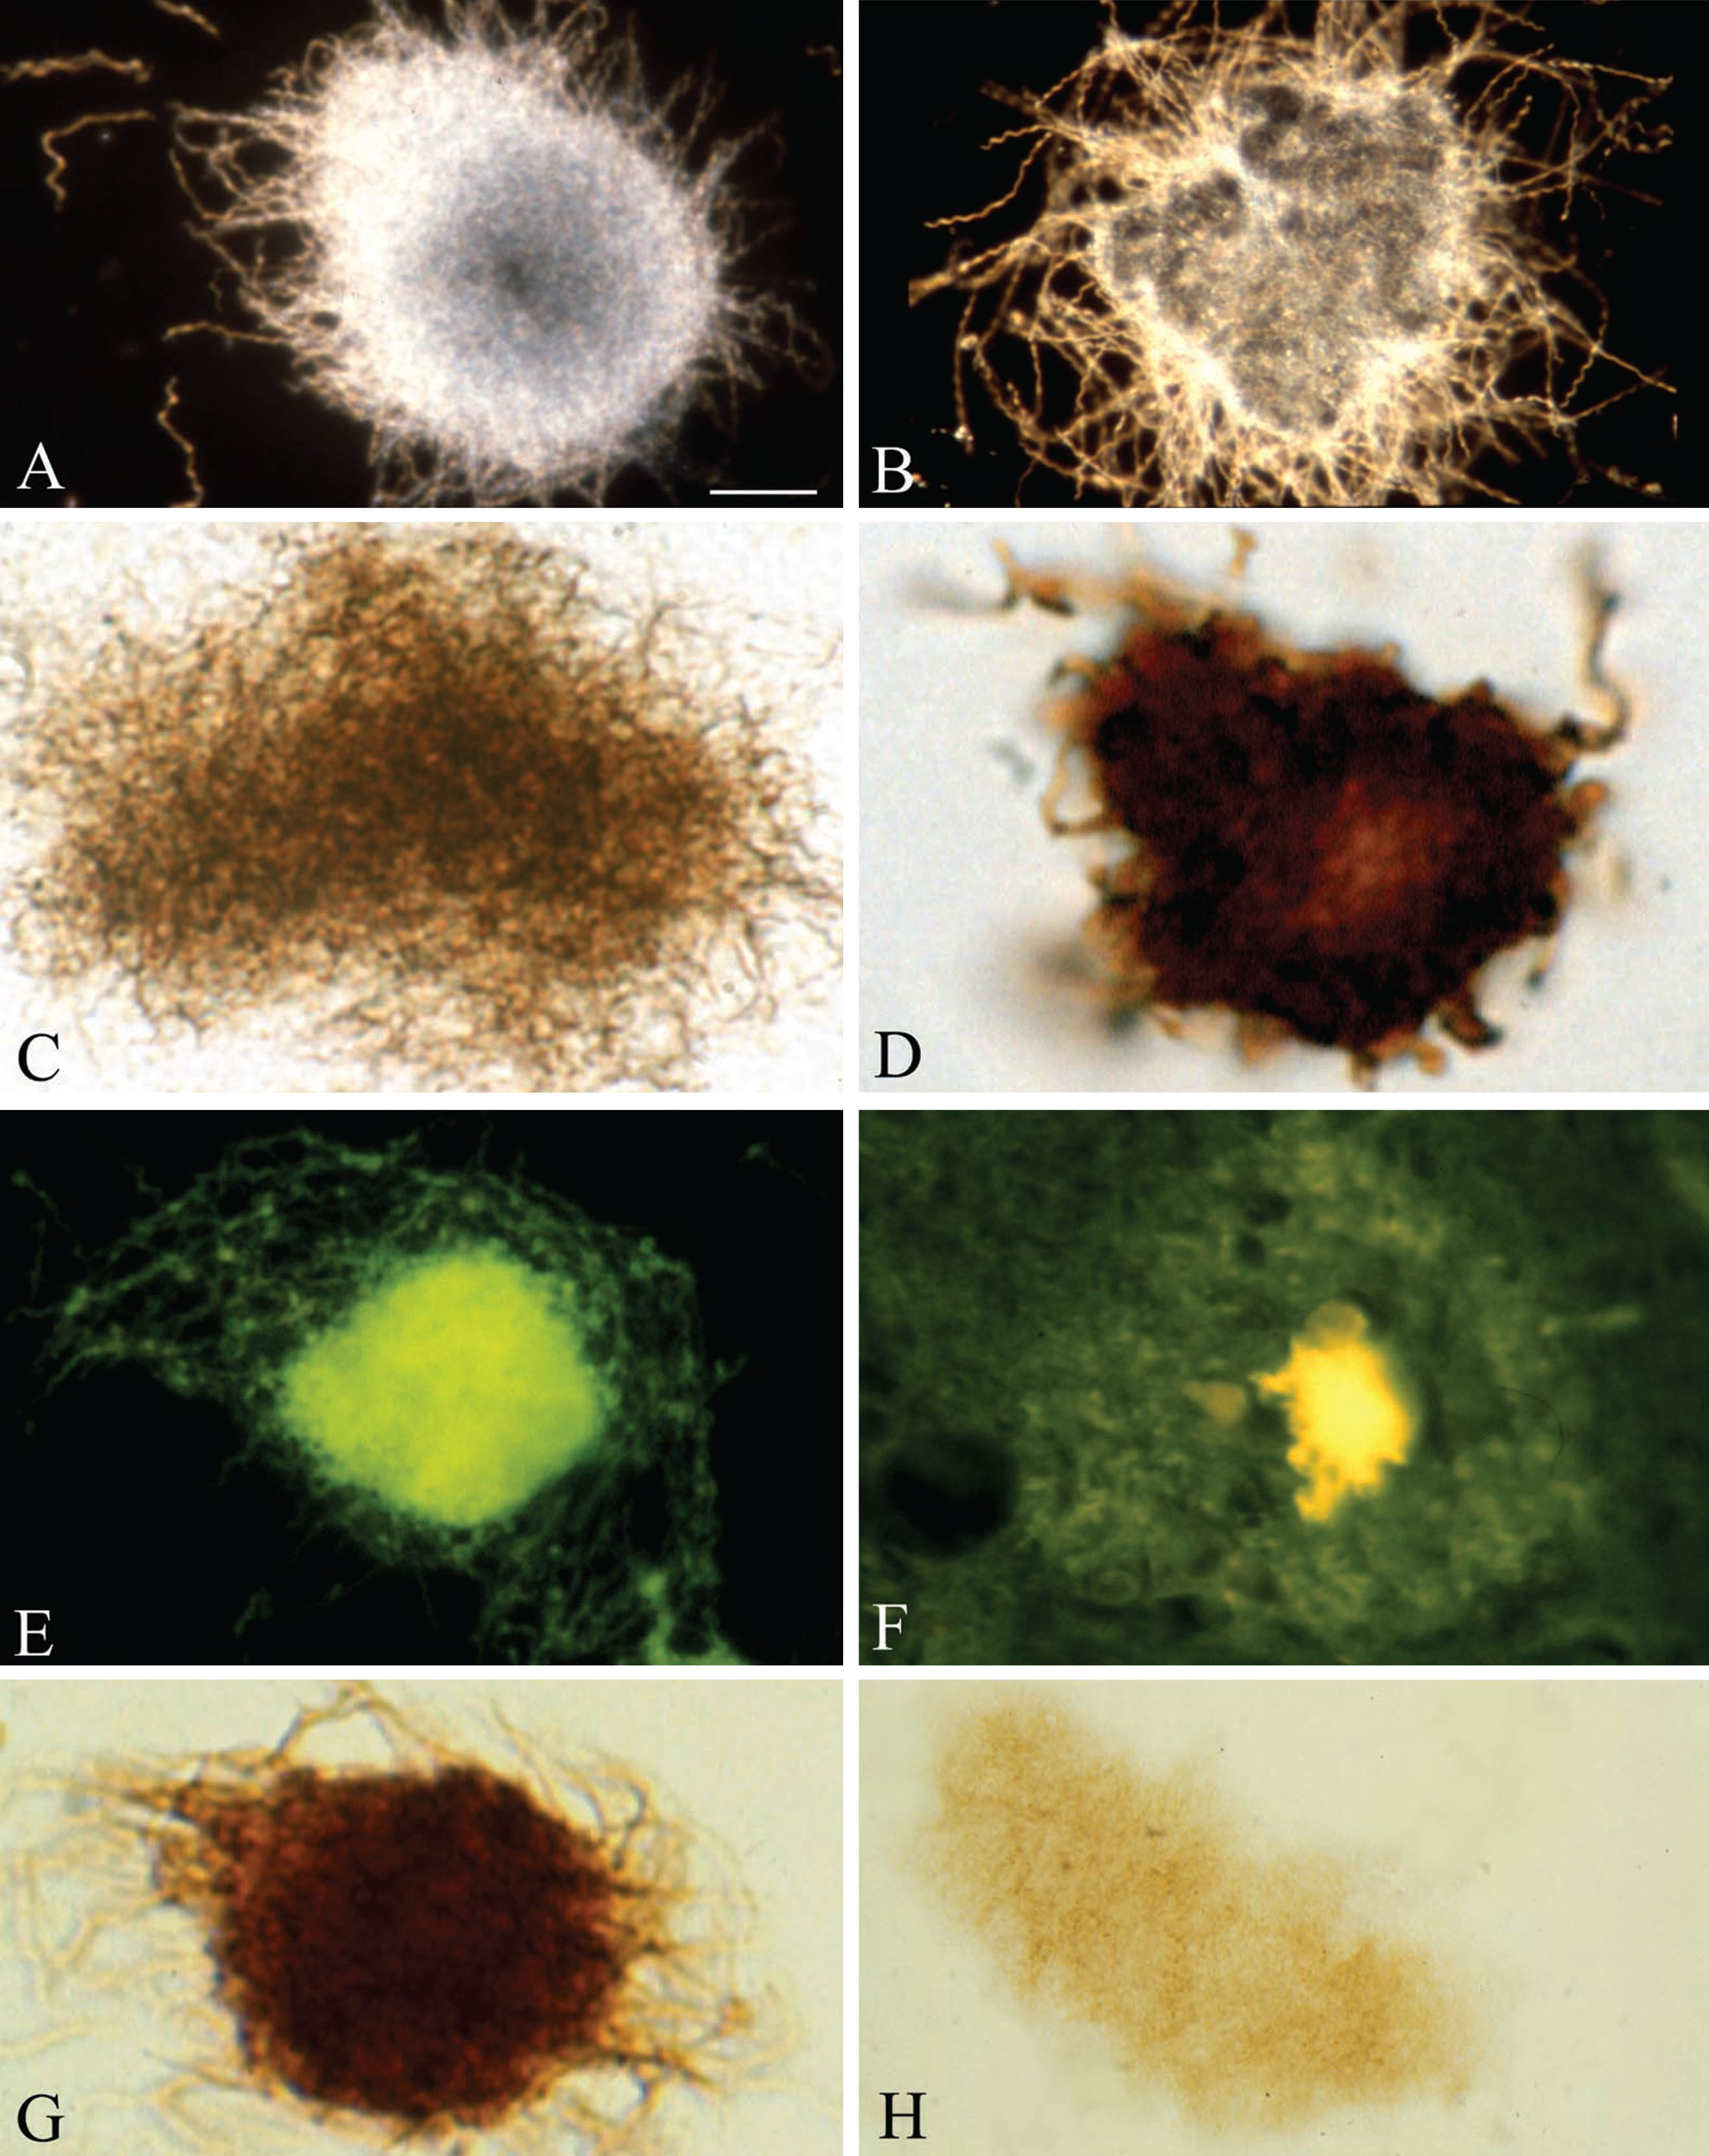 Pure in vitro B. burgdorferi biofilms contain Aβ an important component of senile plaques. A, B) Dark field microscopy images of pure B. burgdorferi biofilms of reference strain B31 cultivated from infected tick (A) and strain ADB1 cultivated from the brain of an AD patient with confirmed chronic Lyme neuroborreliosis (B). C) Pure B. burgdorferi biofilm of strain ADB2 stained with Warthin and Starry silver technique for the detection of spirochetes. D) Pure B. burgdorferi biofilm of strain ADB2 immunostained with anti-OspA monoclonal antibody exhibiting positive immunoreaction. E) Green thioflavin S fluorescence of in vitro formed B. burgdorferi biofilm of strain ADB2. F) Thioflavin S fluorescence of a senile plaque in the frontal cortex of an AD patient where B. burgdorferi ADB2 strain was cultivated from the brain. G) In vitro formed B. burgdorferi biofilm (strain B31) immunoexpressing AβPP; H) In vitro B. burgdorferi biofilm of strain ADB1 exhibiting positive Aβ immunoreaction. Scale bar = A: 15 μm for A-C and E-H and 10 μm for D.